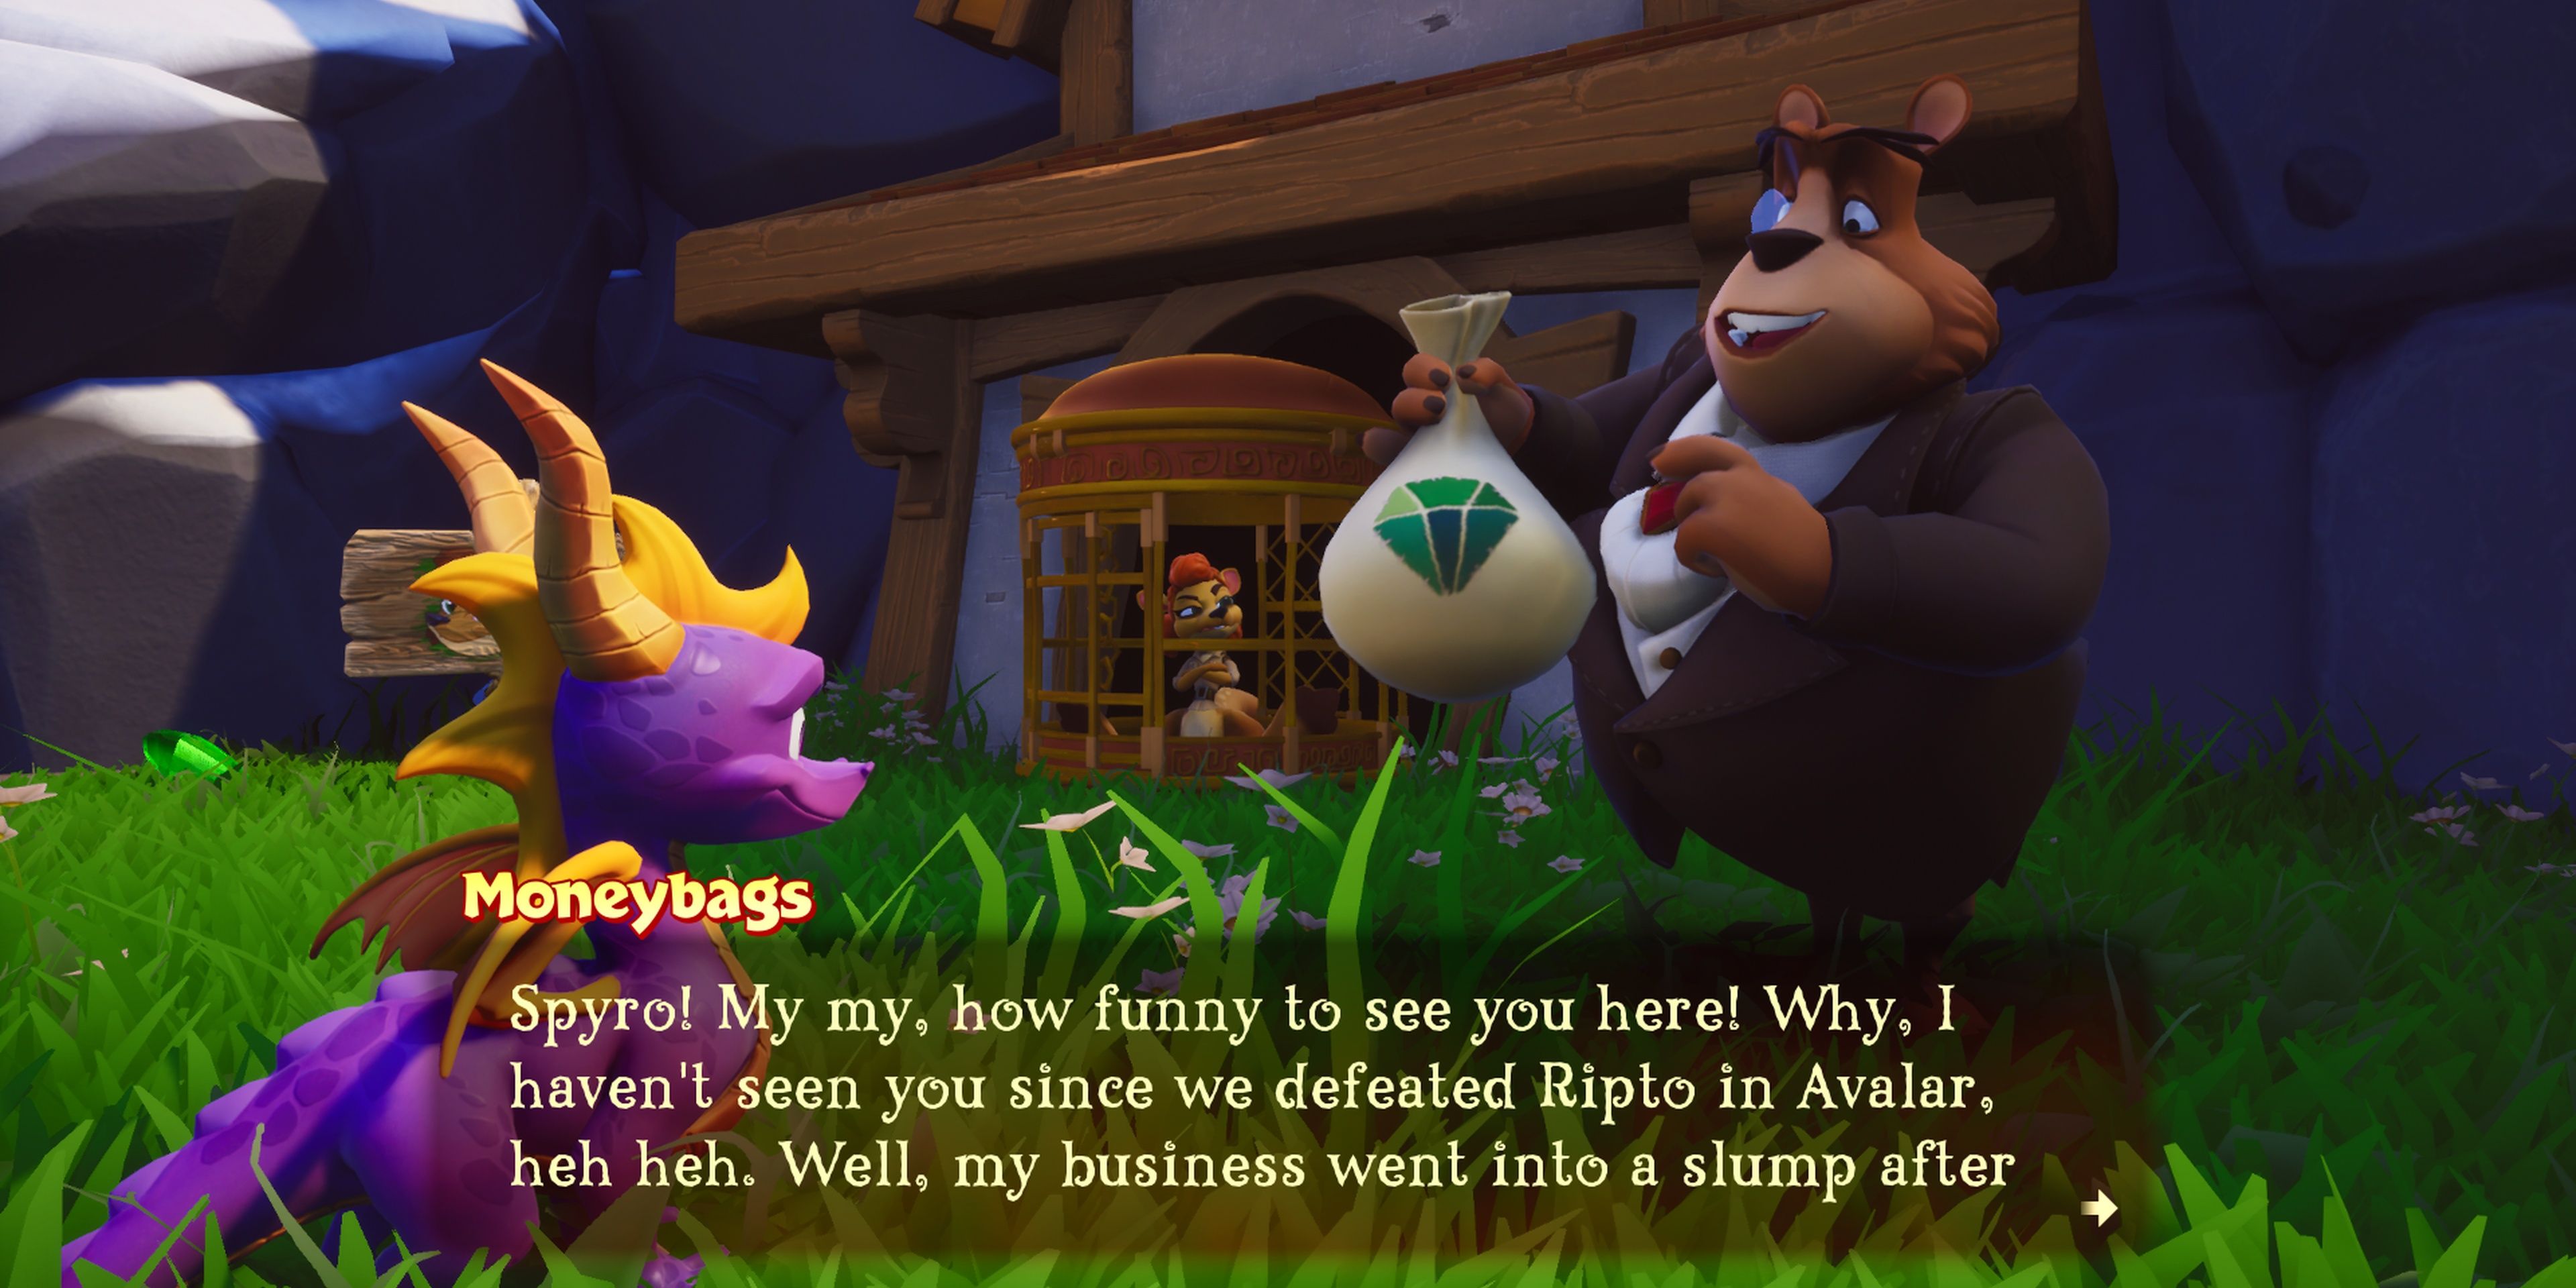 Moneybags in Spyro 3: Year of the Dragon